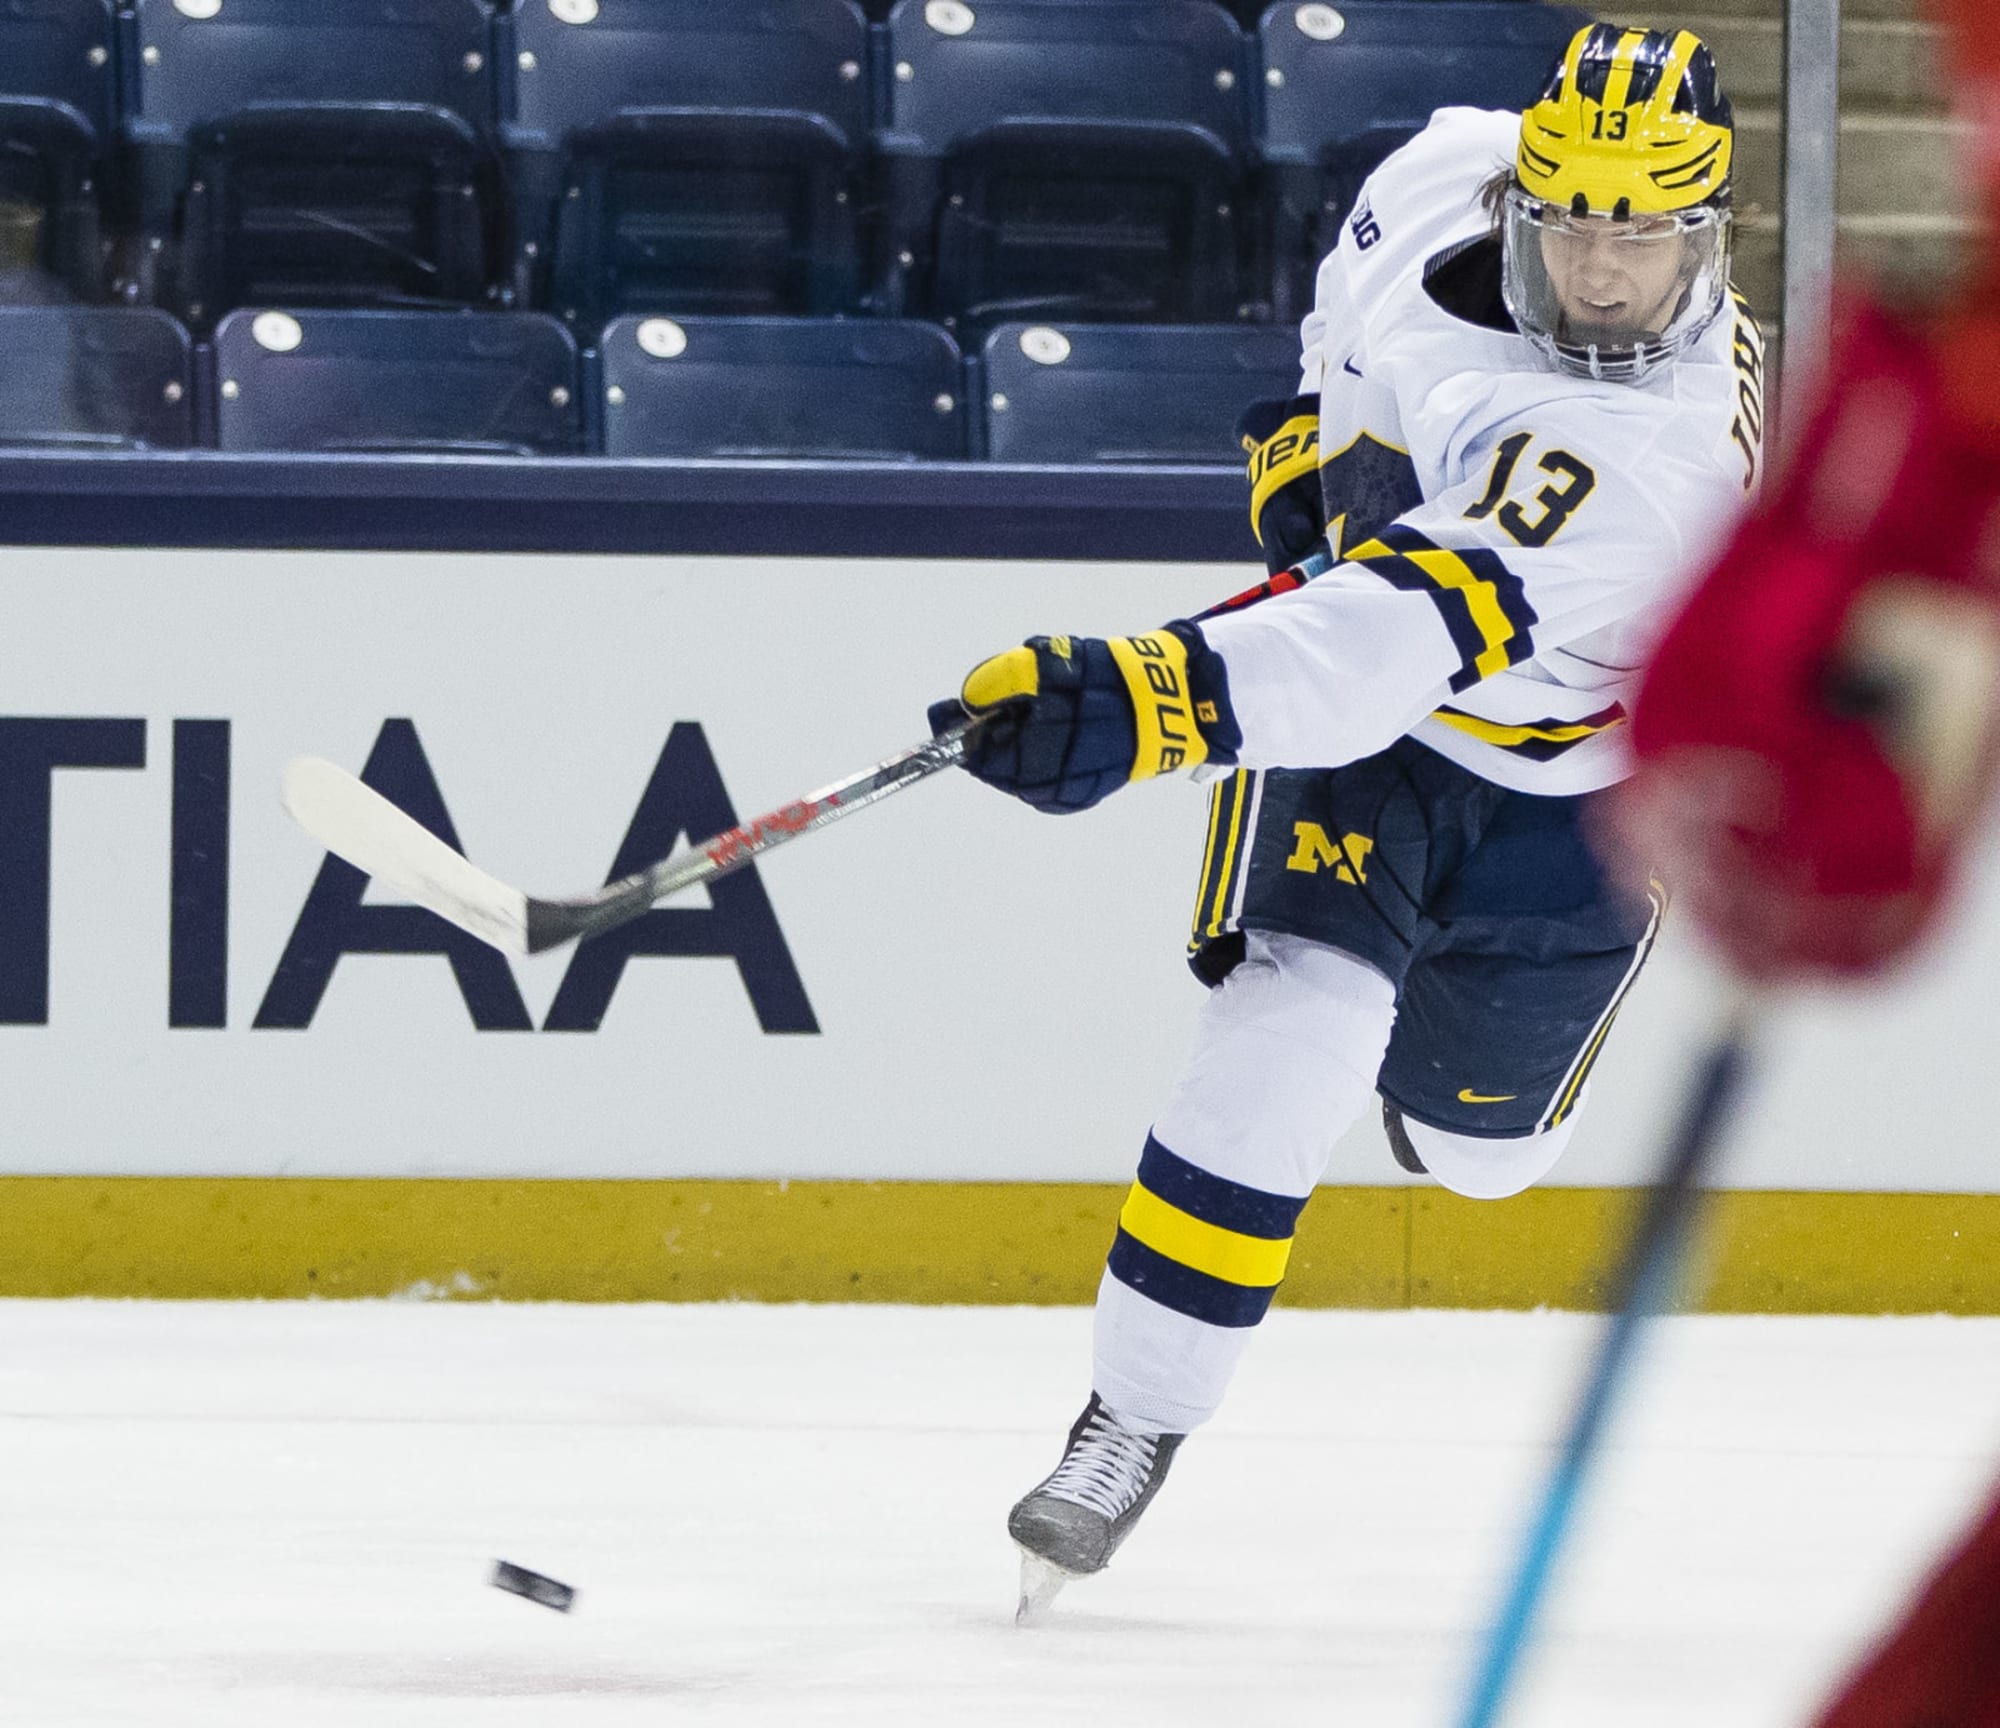 Michigan Hockey 3 players projected to get drafted in Top 10 in 2021